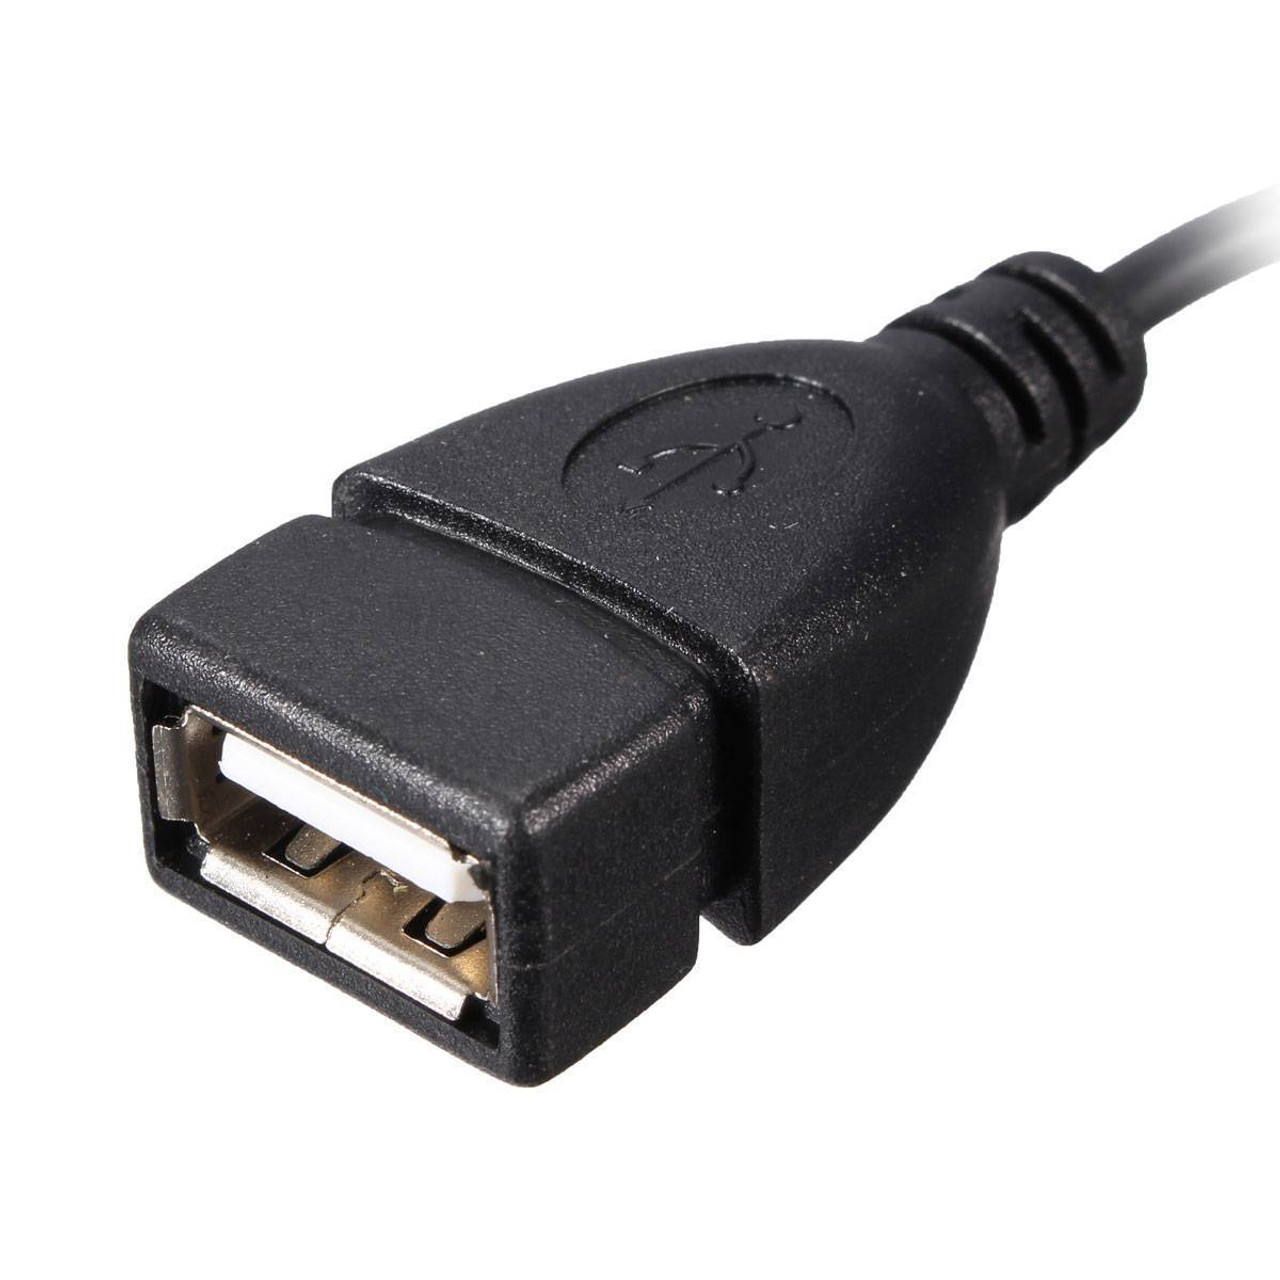 Micro USB OTG Adapter Cable With USB (Type-A) Power Supply Plug For Mobile Phone Tablet Amazon Firestick TV